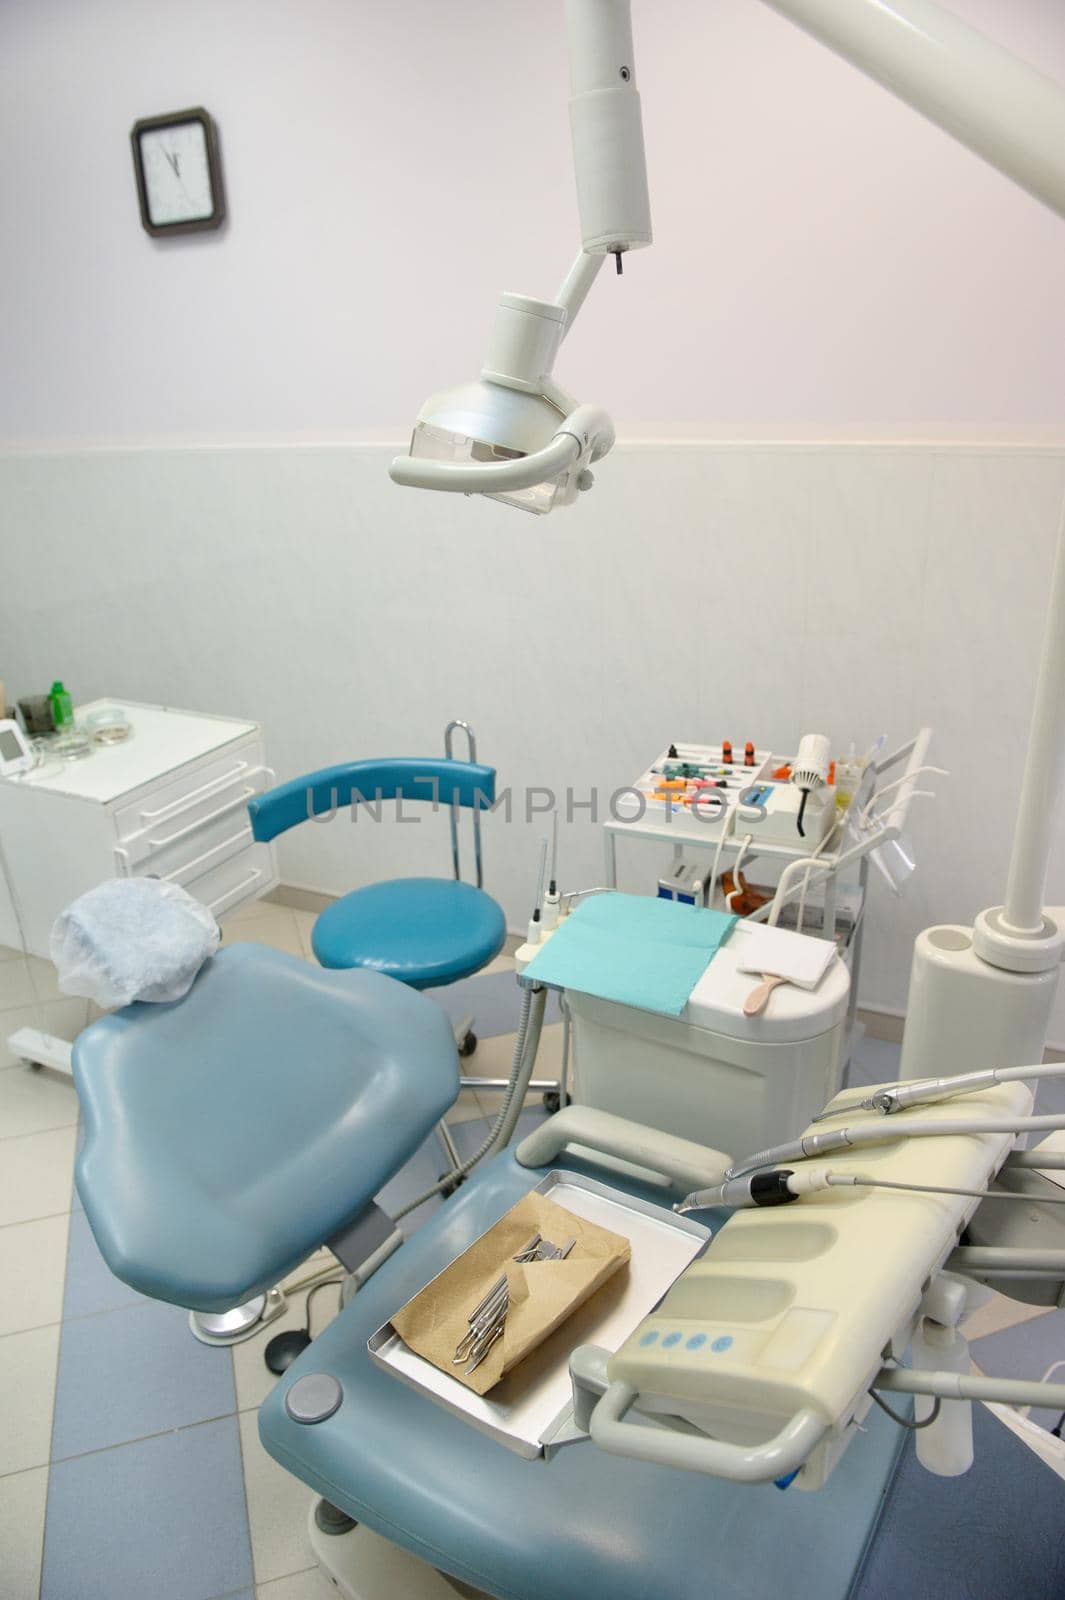 dentist's workplace in the dental office, accessories.